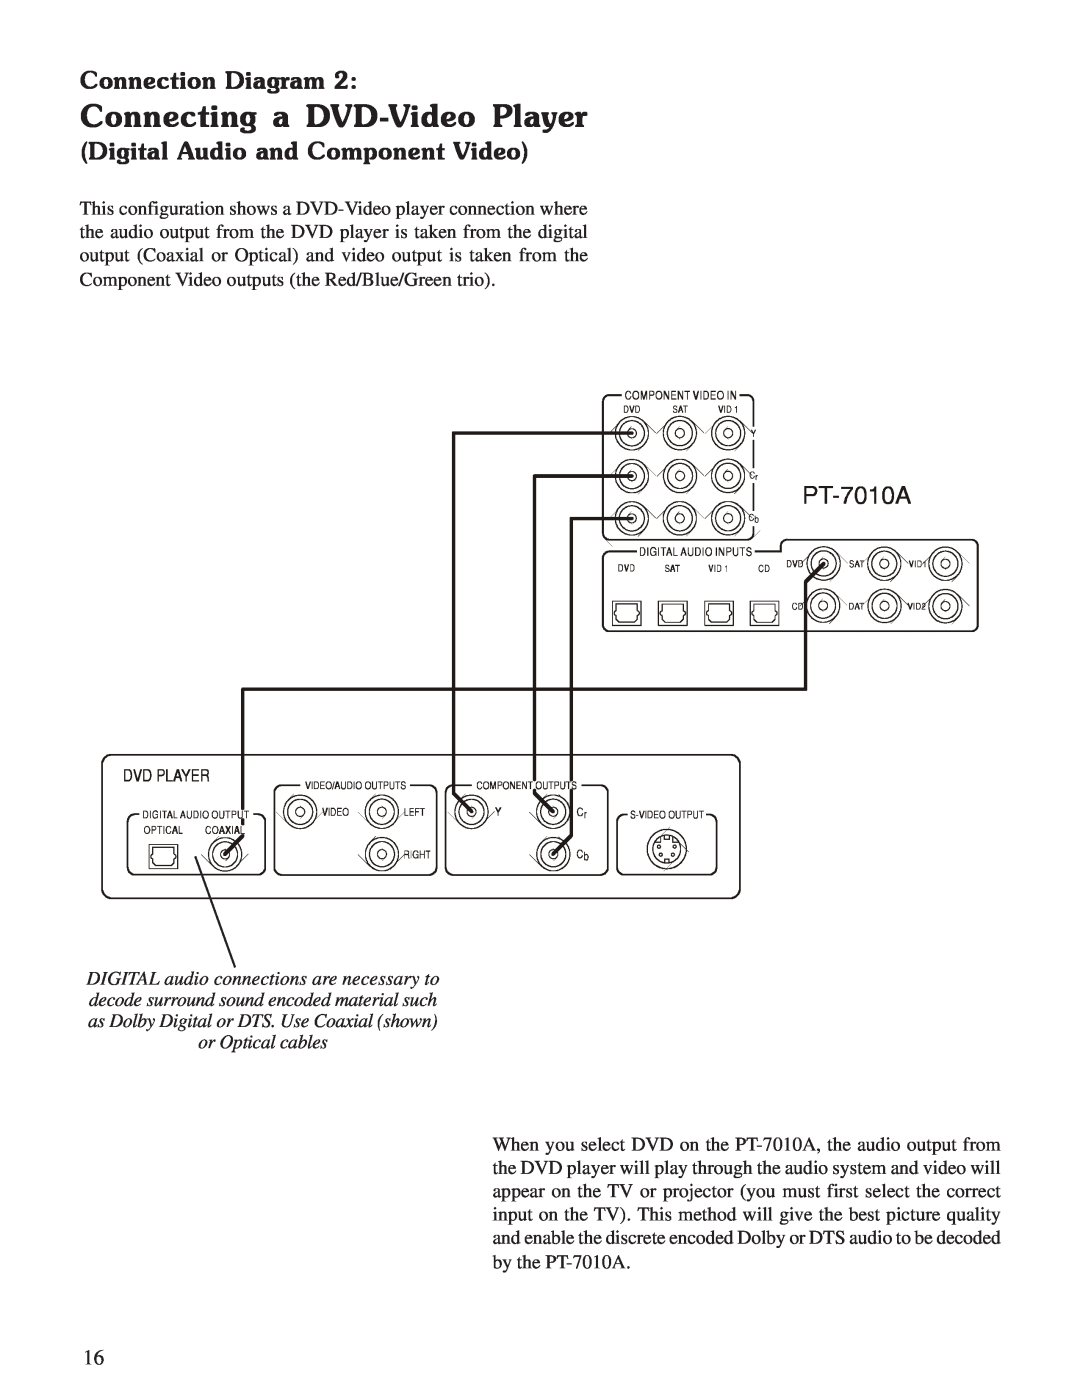 Sherbourn Technologies PT-7010A Digital Audio and Component Video, Connecting a DVD-VideoPlayer, Connection Diagram 